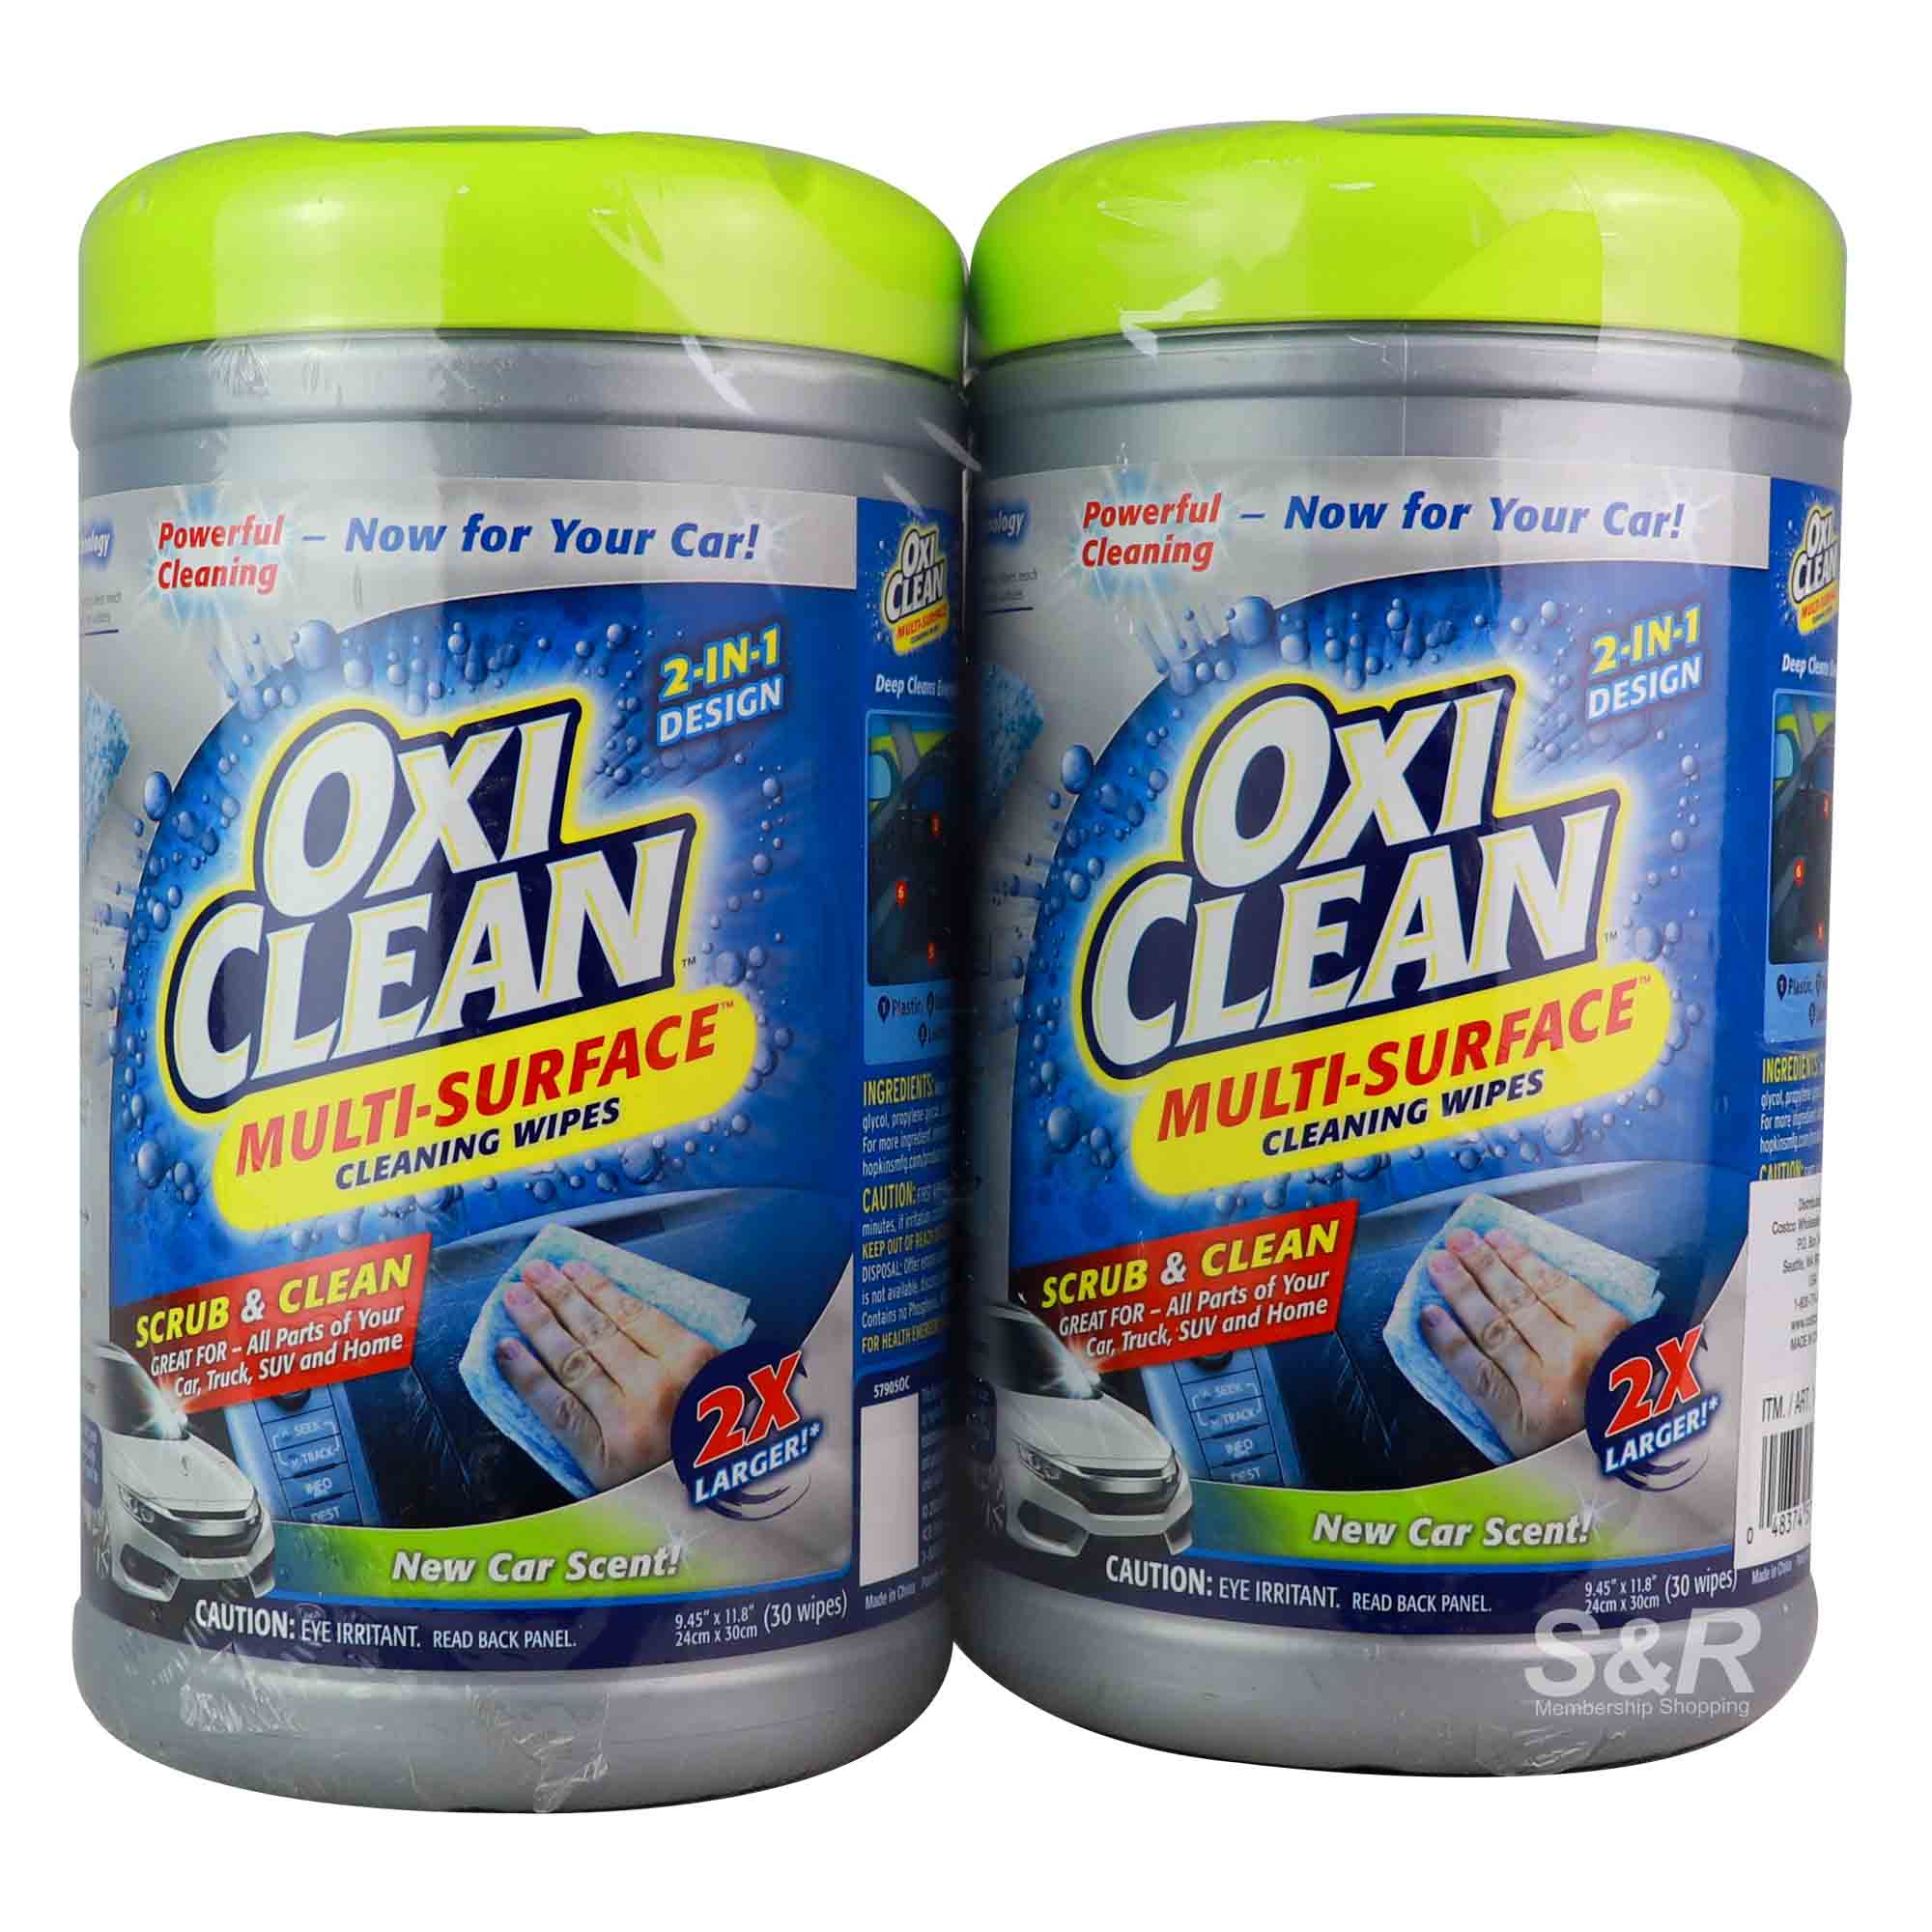 Oxi Clean Multi-Surface Cleaning Wipes 2 packs